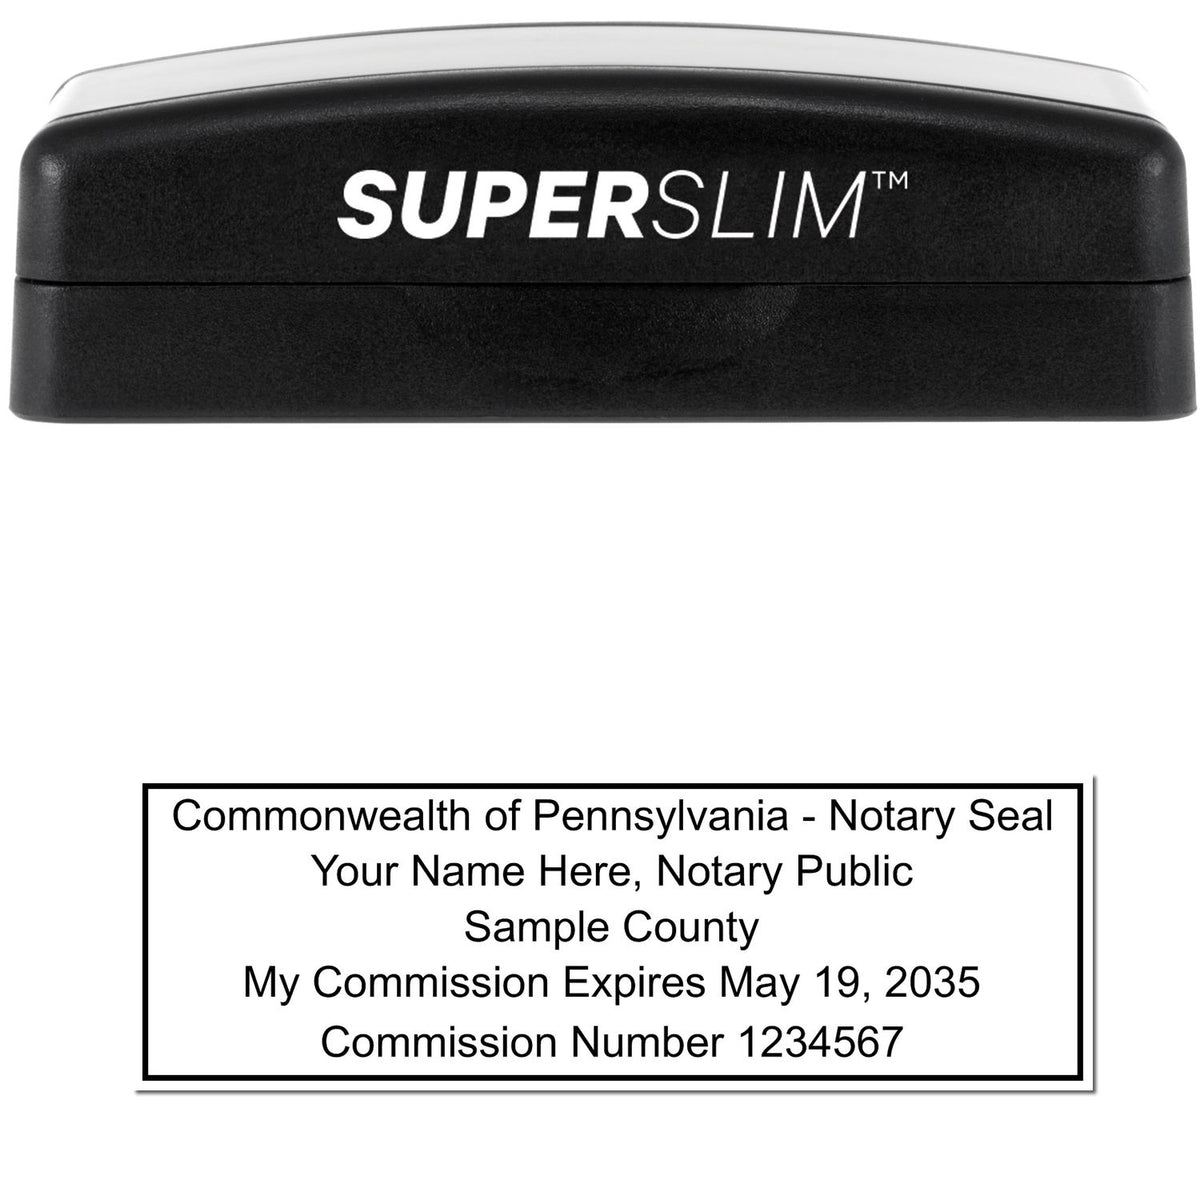 The main image for the Super Slim Pennsylvania Notary Public Stamp depicting a sample of the imprint and electronic files